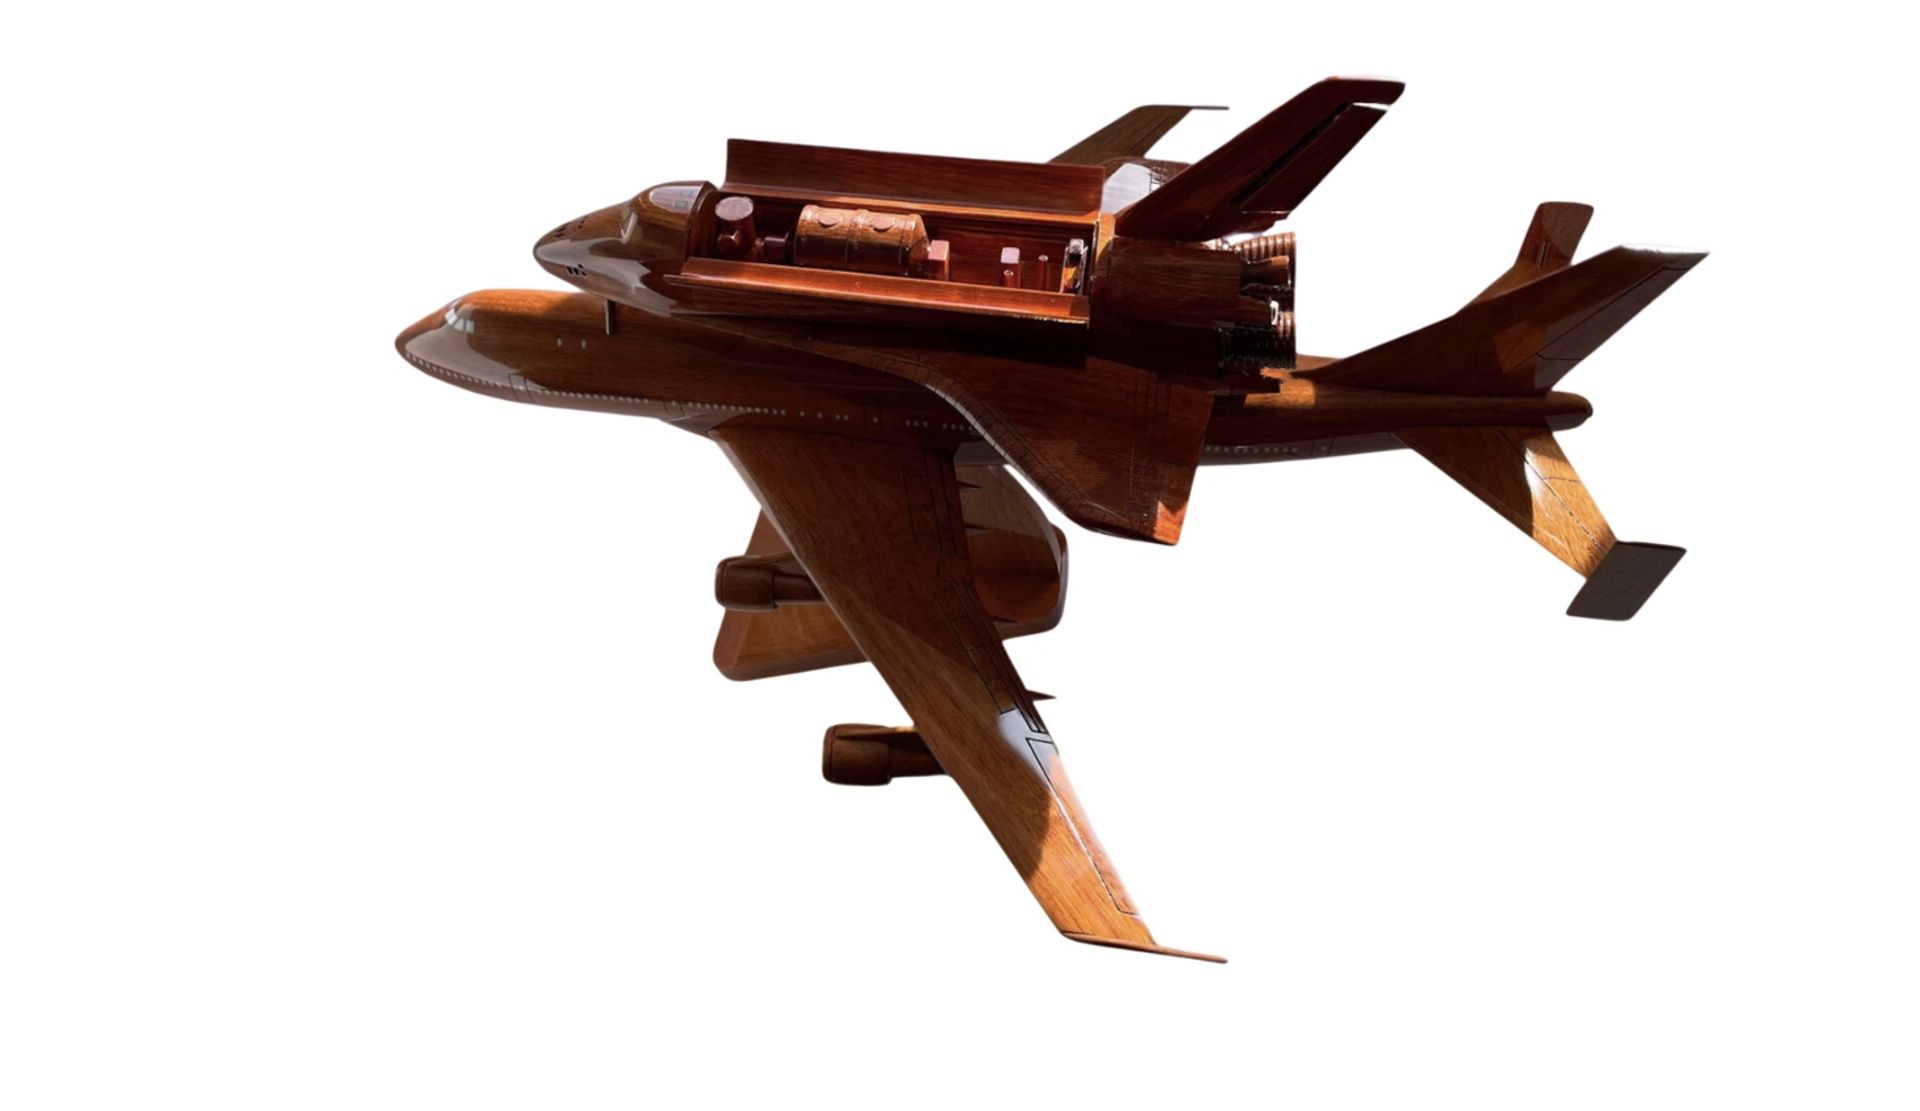 Boeing 747 with Space Shuttle Wooden Scale Model - Image 7 of 8